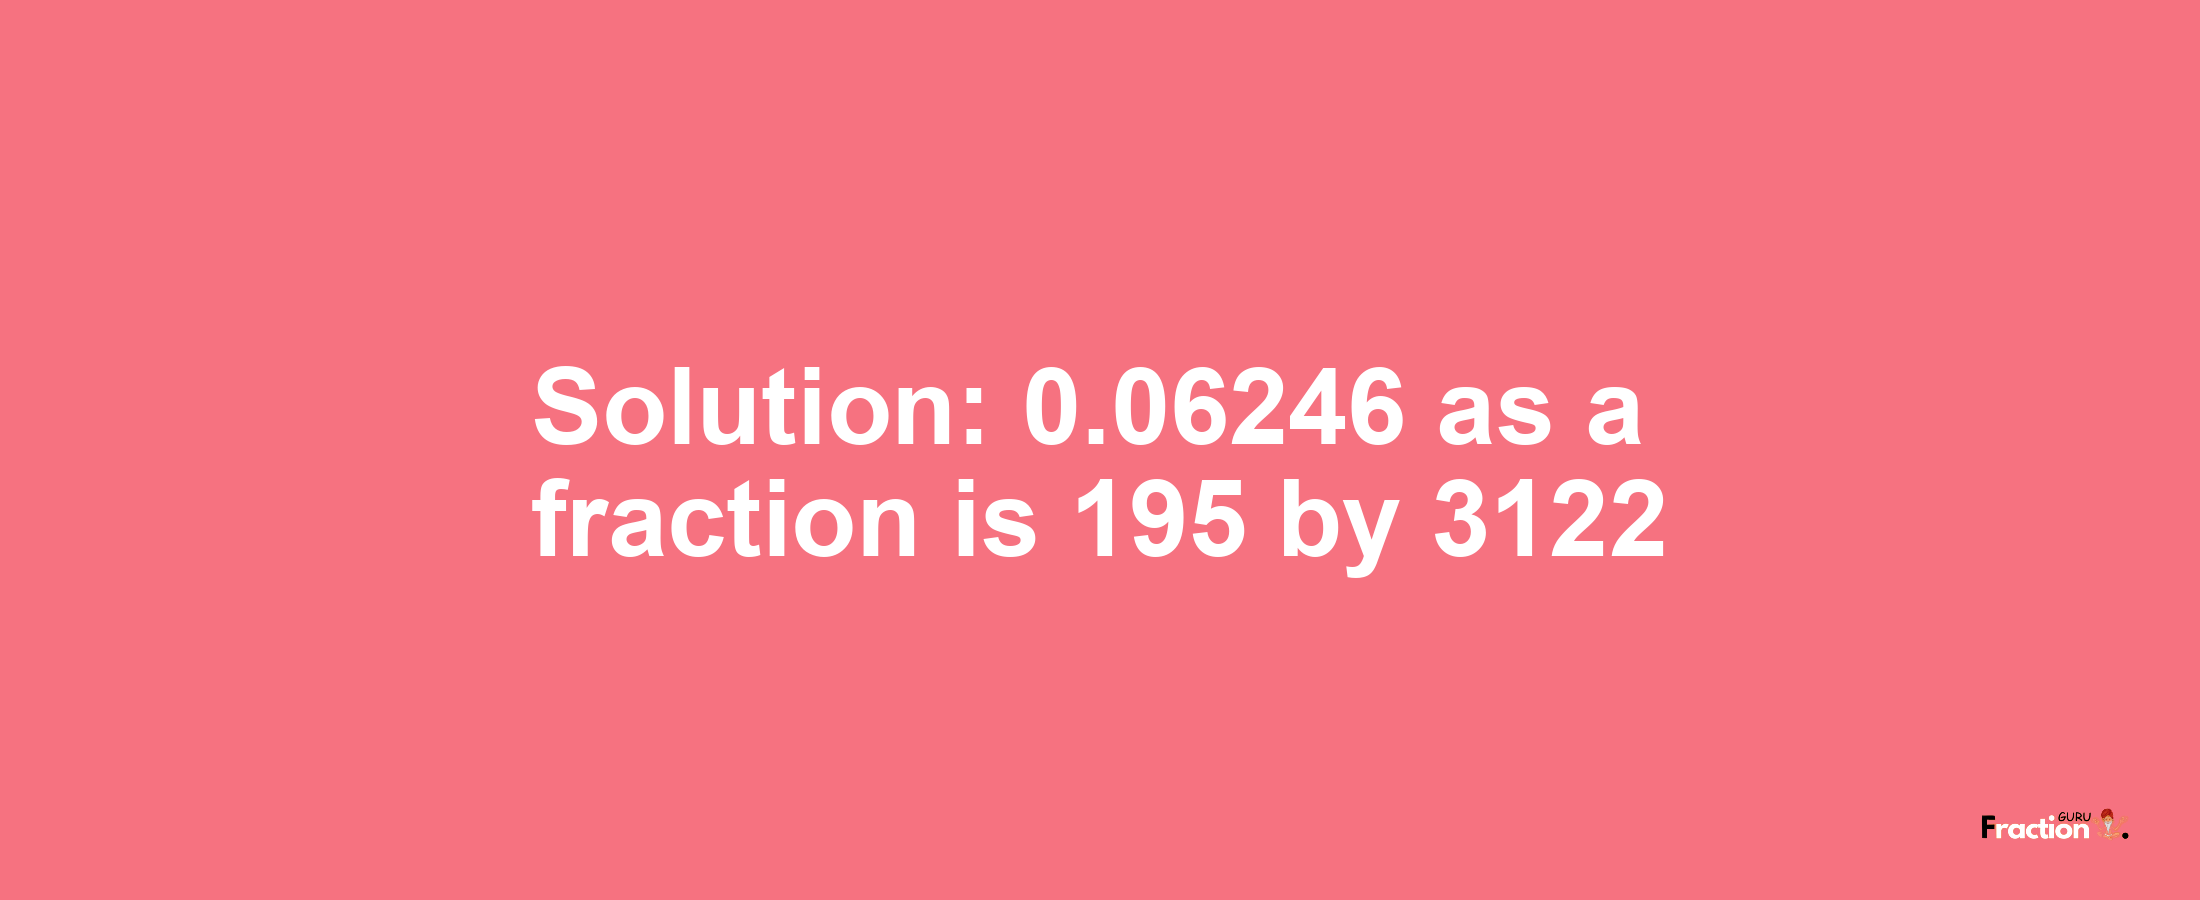 Solution:0.06246 as a fraction is 195/3122